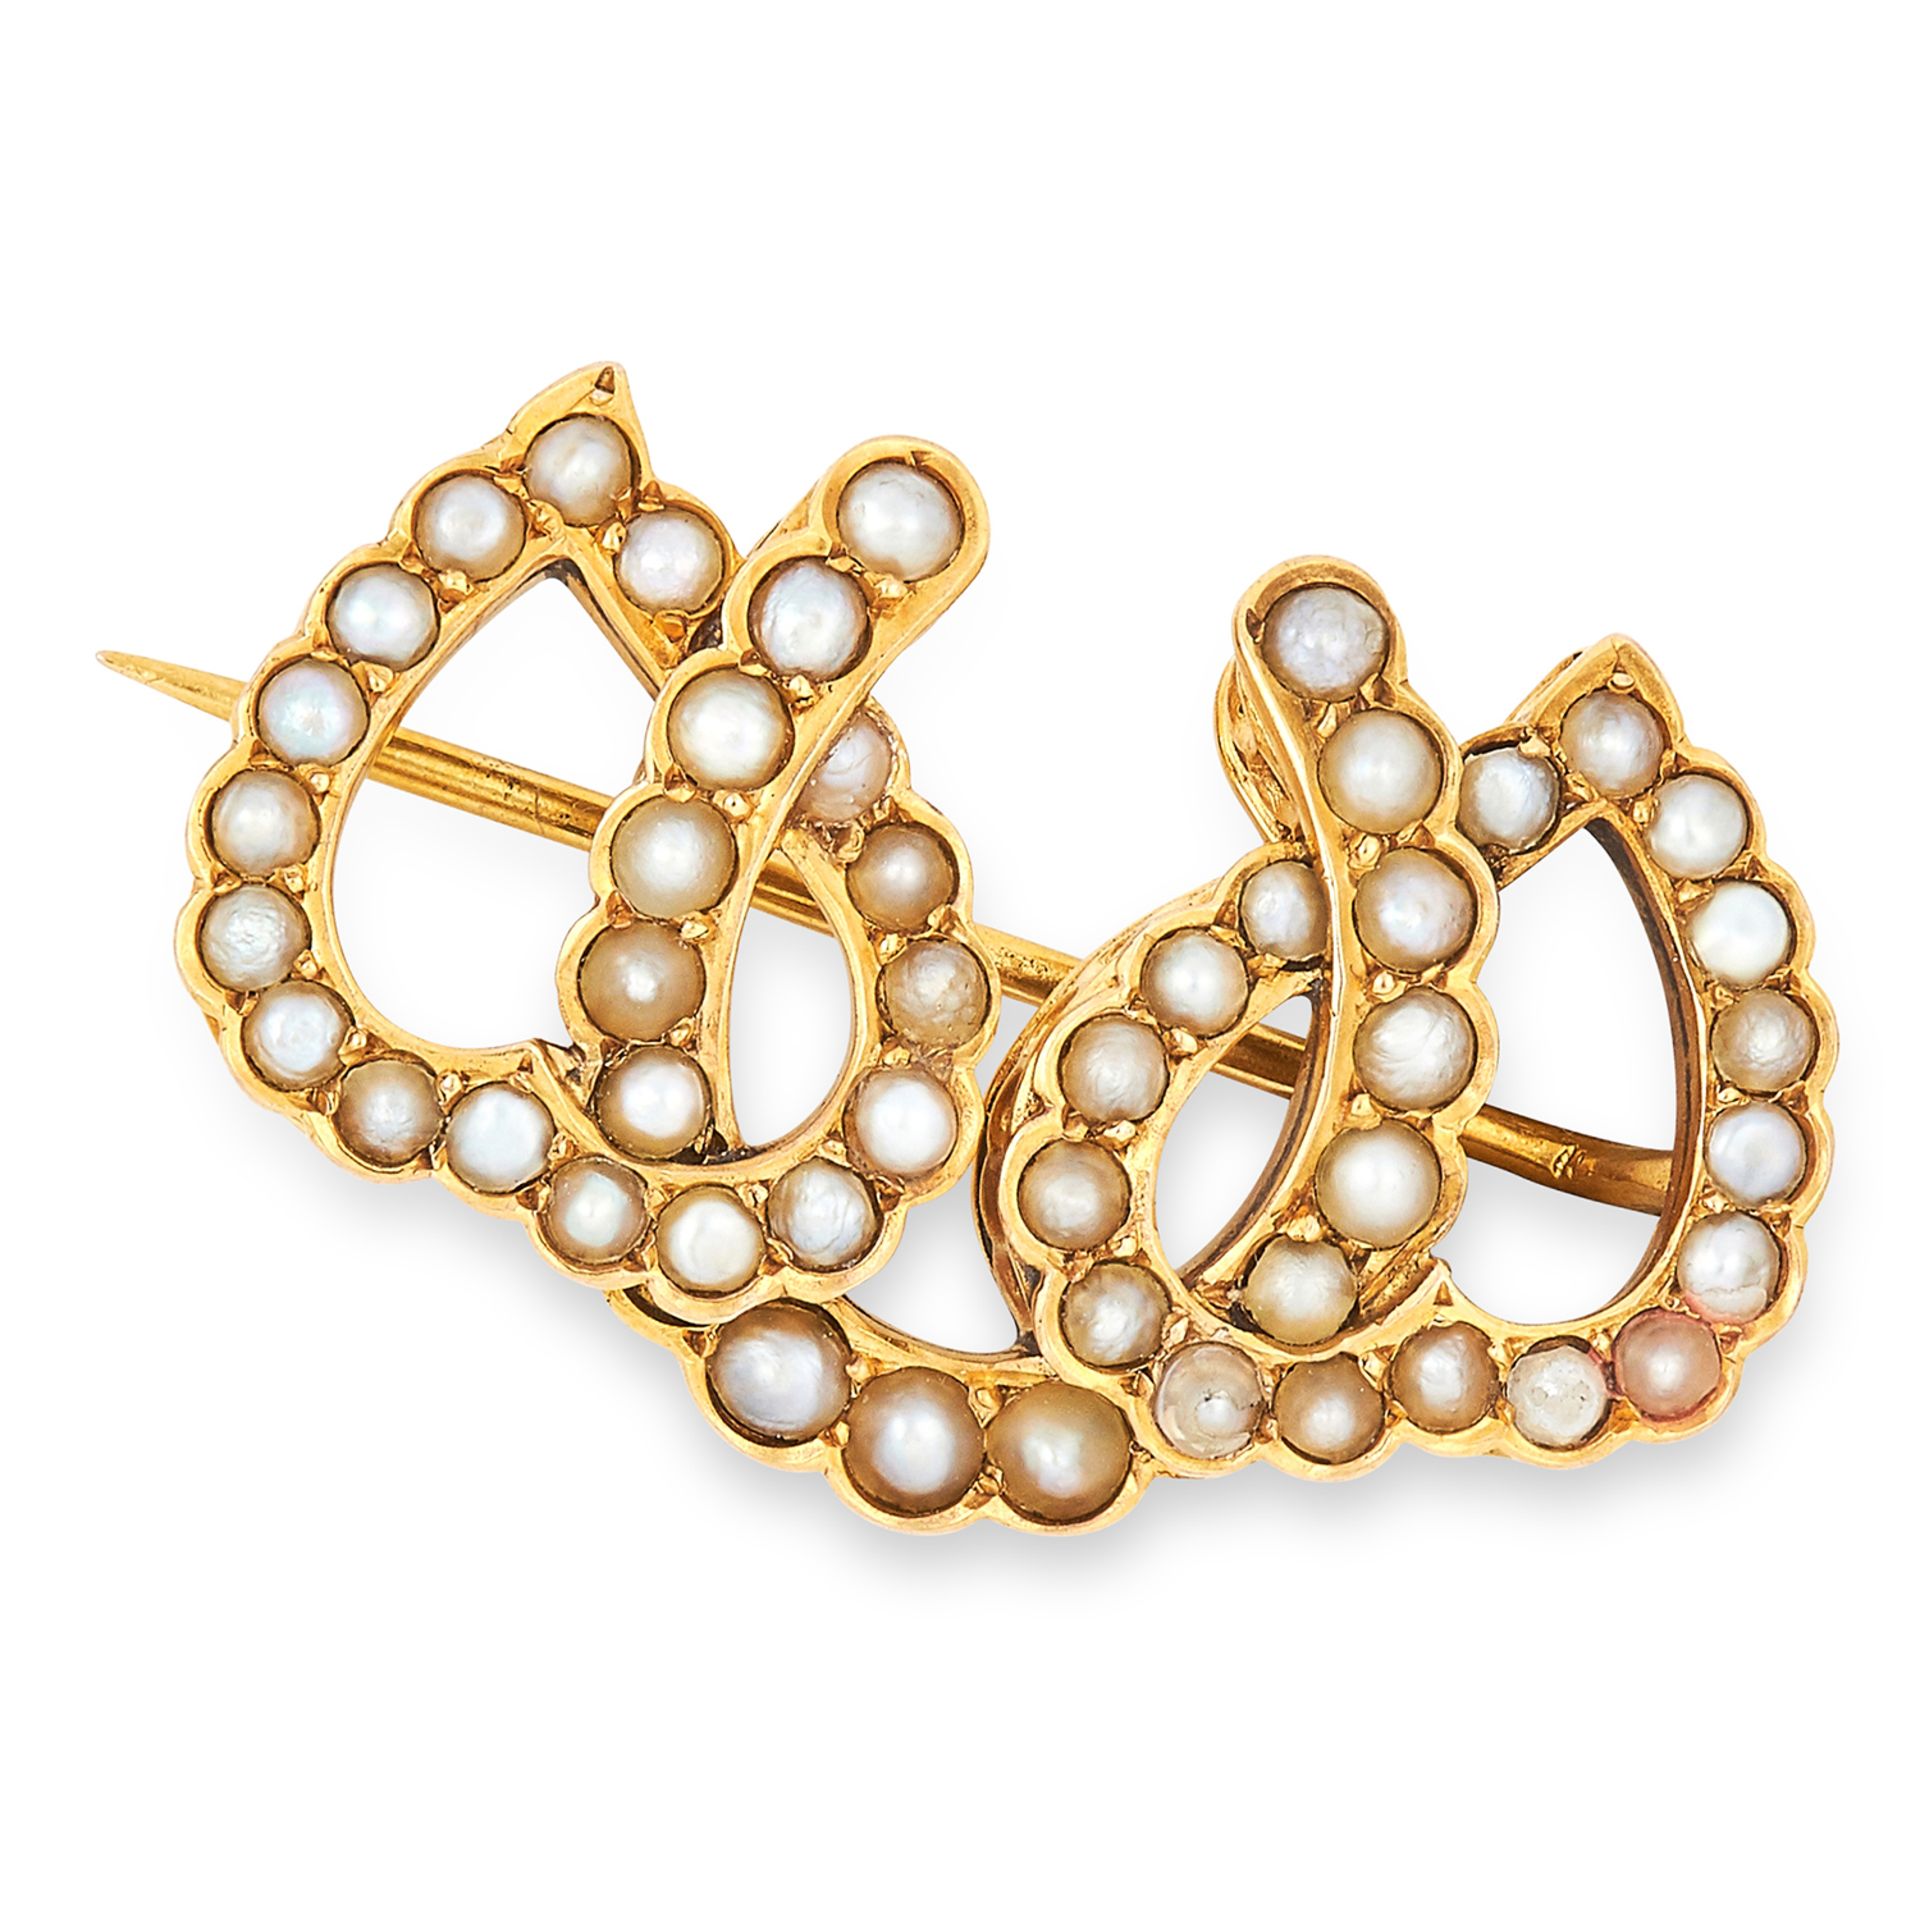 ANTIQUE PEARL HORSESHOE BROOCH, CIRCA 1900 the three overlapping horseshoes set with pearls, 2.